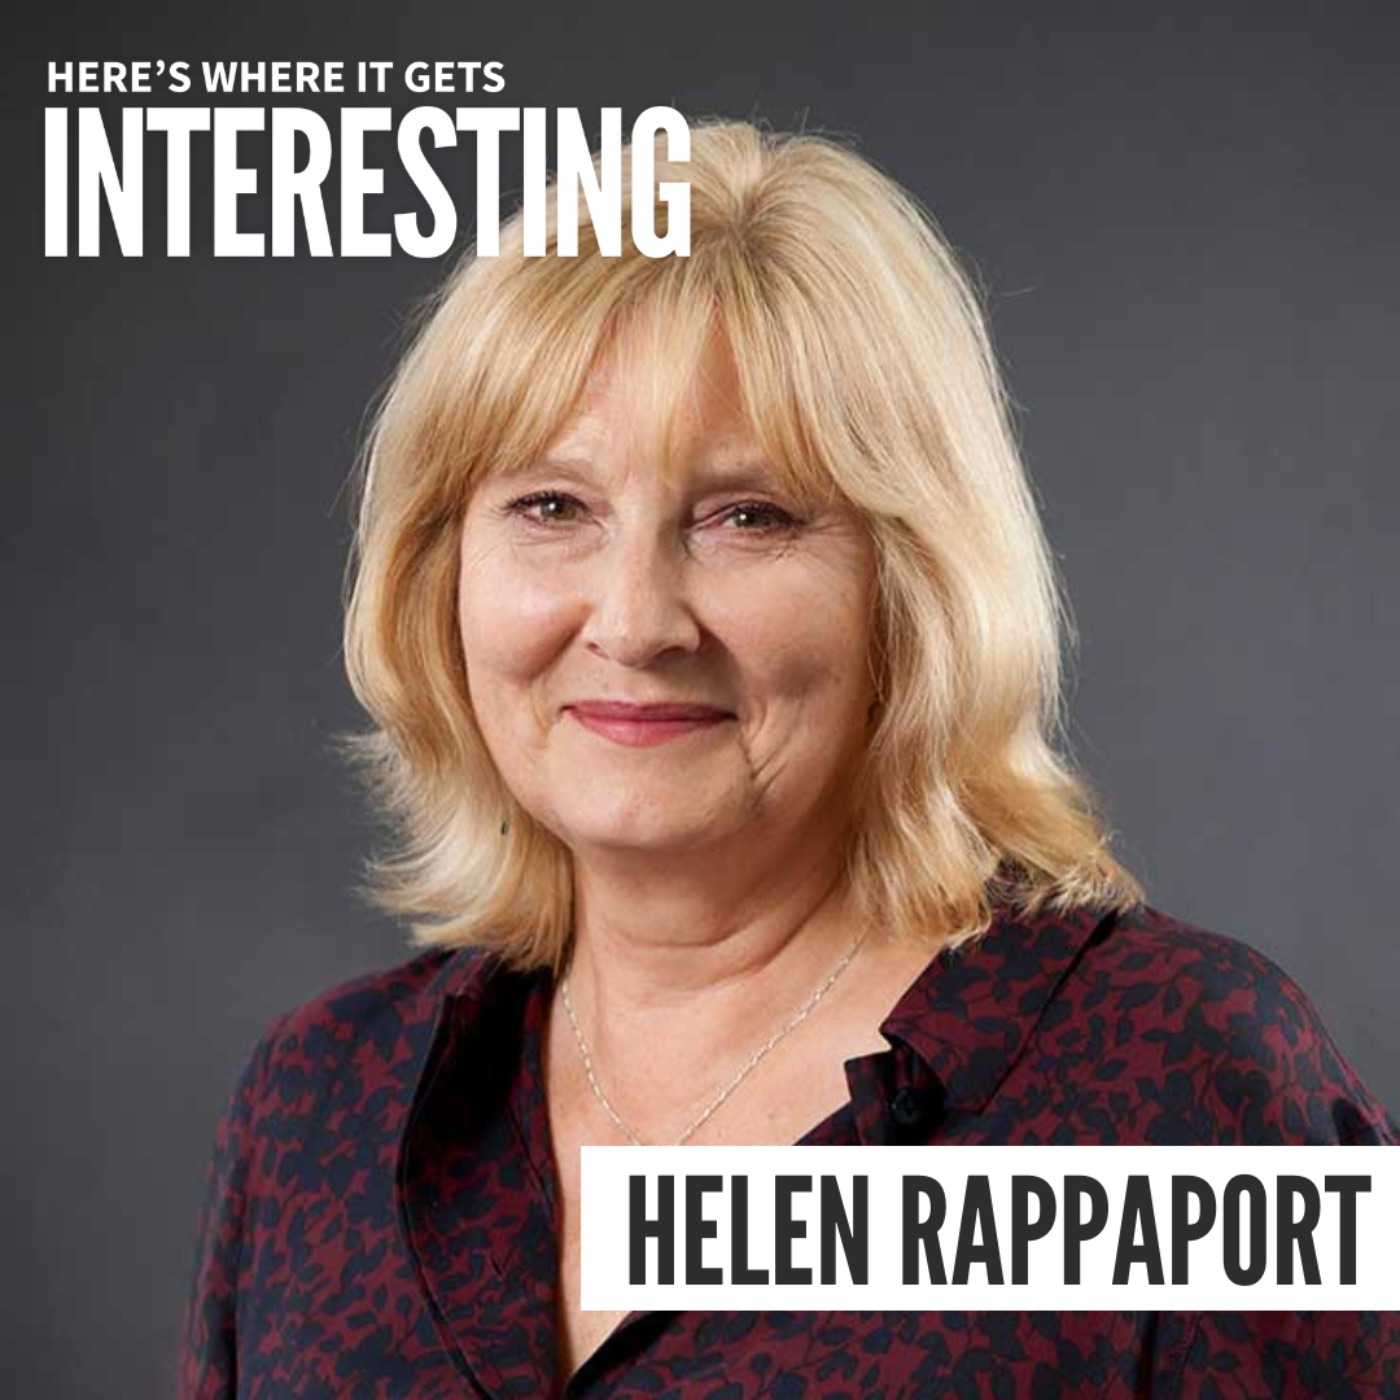 The Tragedies and Legacy of the Royal Romanovs with Helen Rappaport